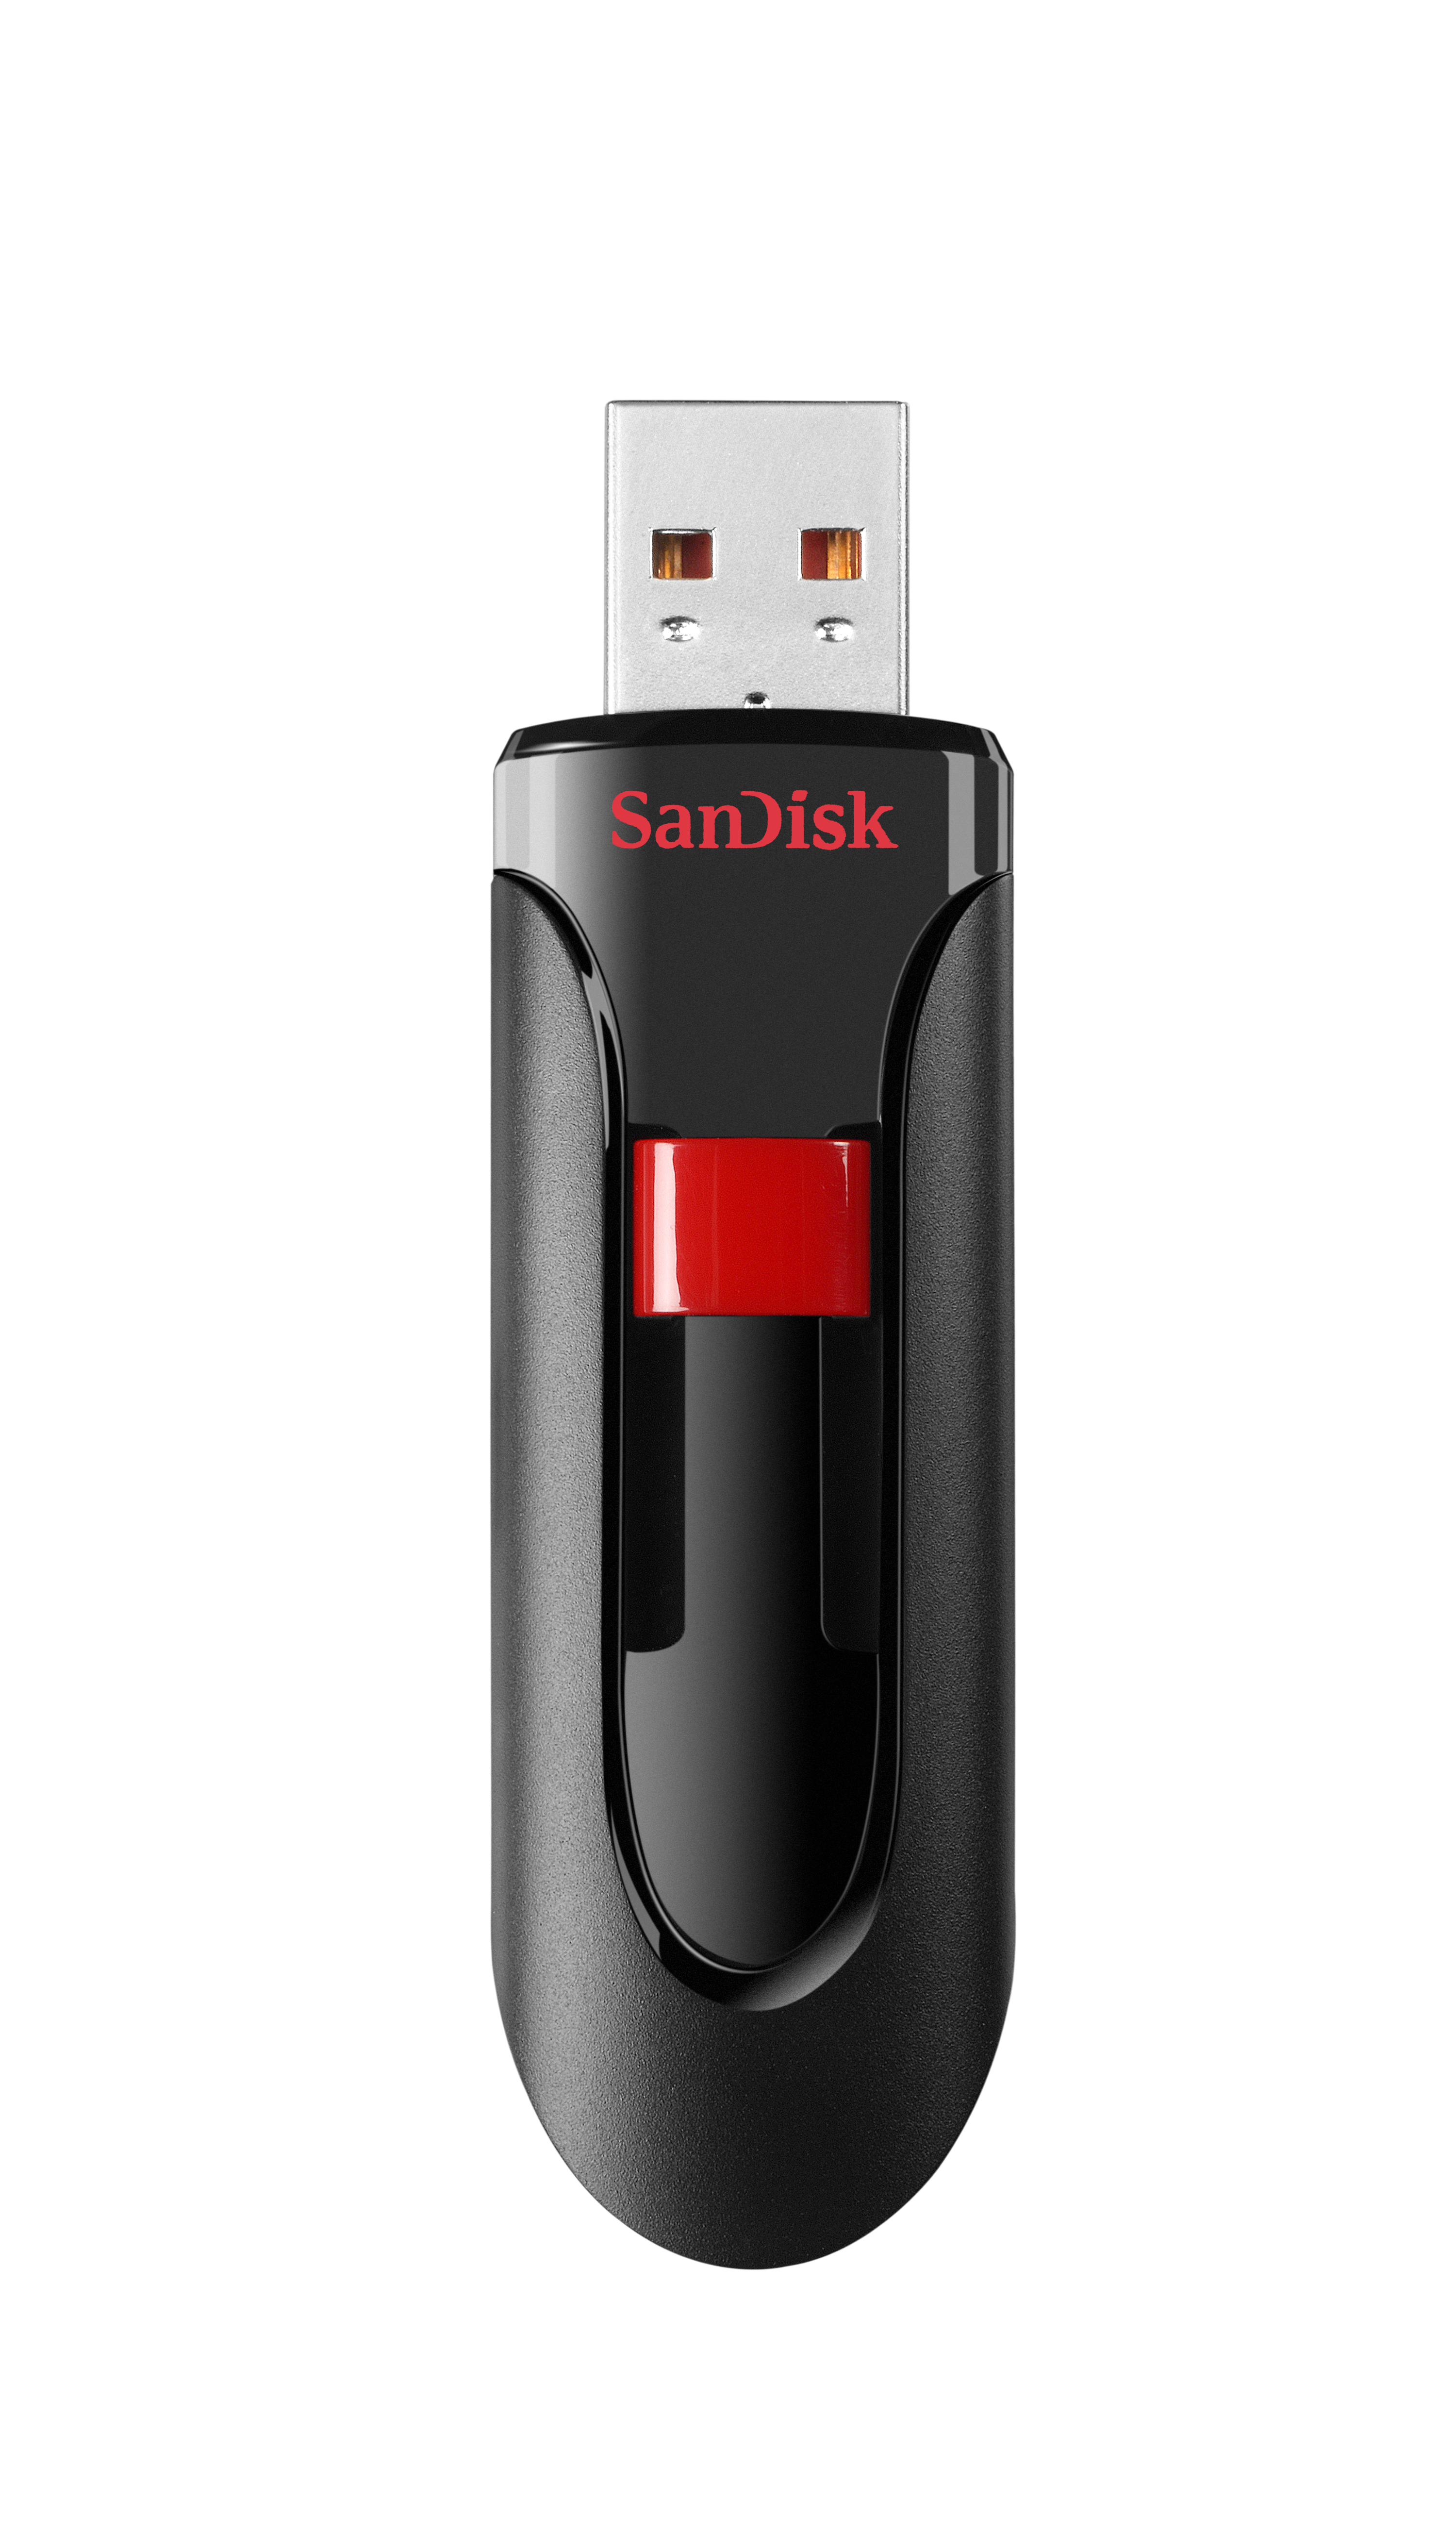 SanDisk 16GB Cruzer Glide USB 2.0 Flash Drive, 3 Pack - SDCZ60-016G-AW46T - image 4 of 7